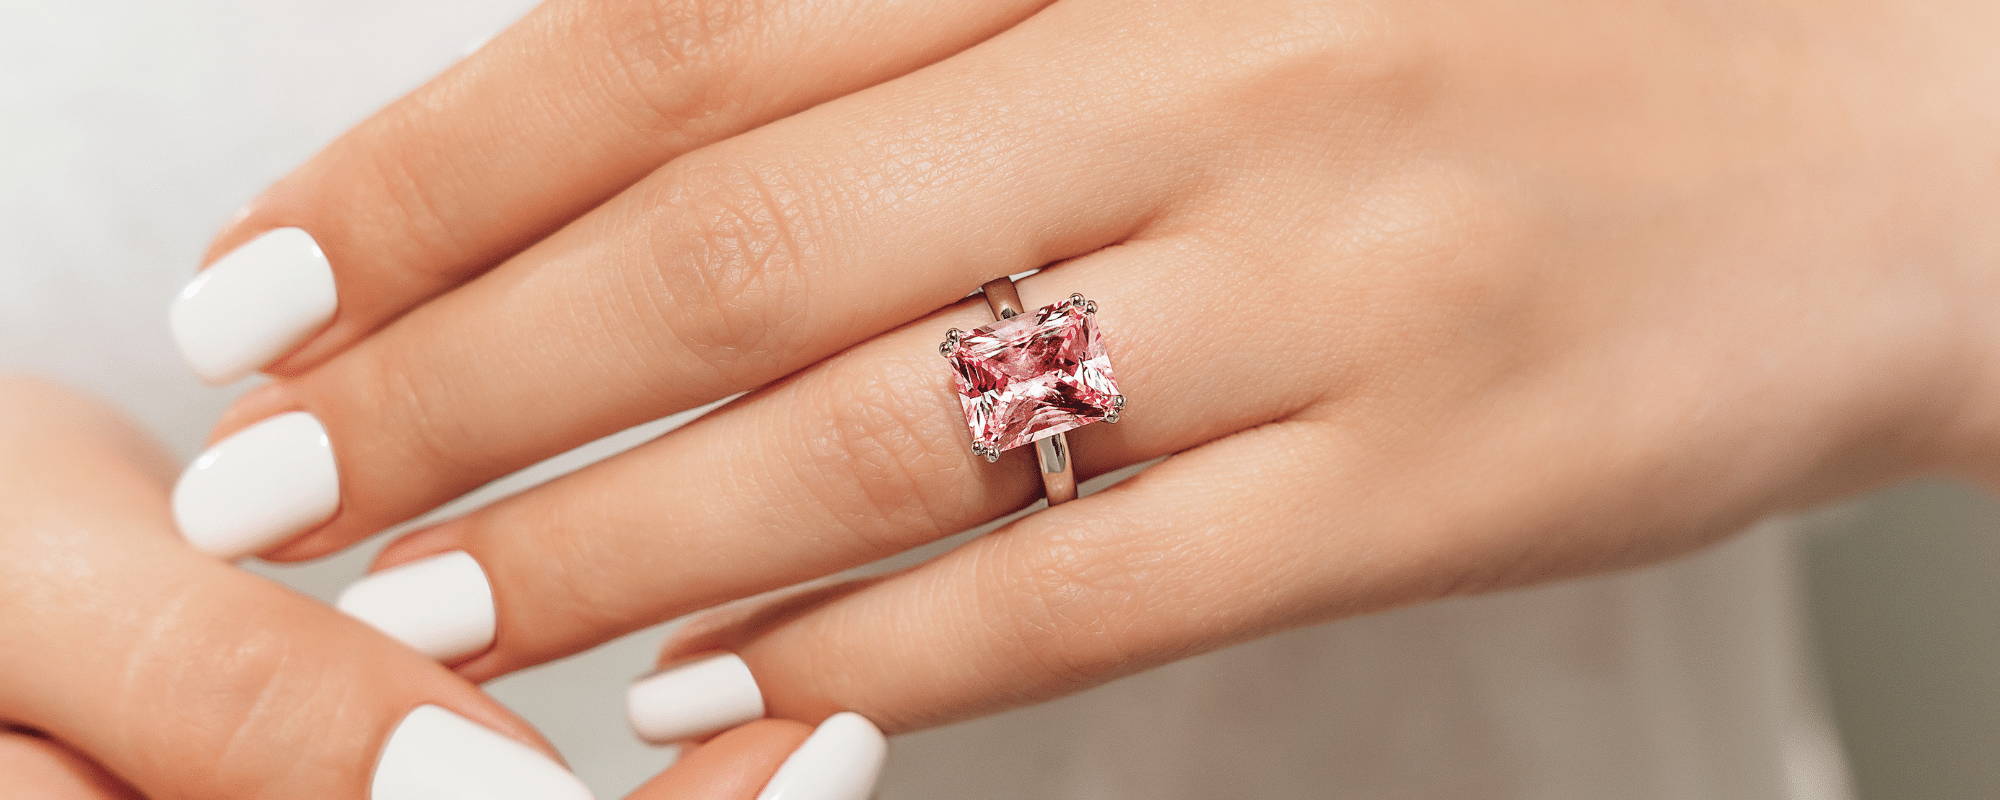 7 Pink Diamond Engagement Rings for a Dream Proposal